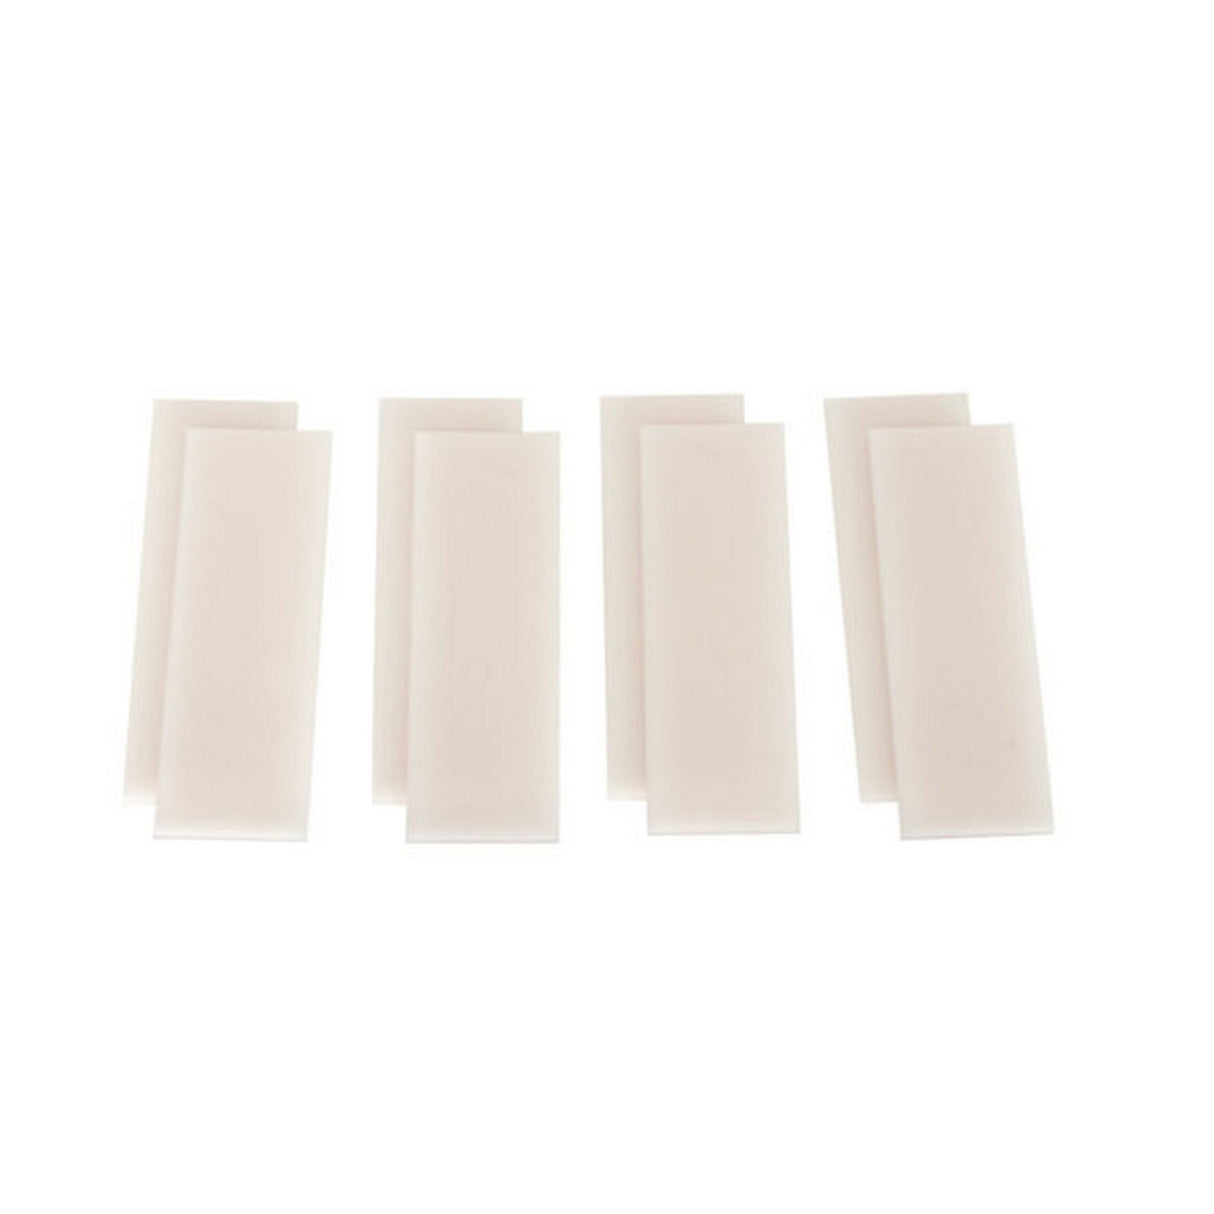 Lowell ISO-P1 Isolation Pads, 8 Pack